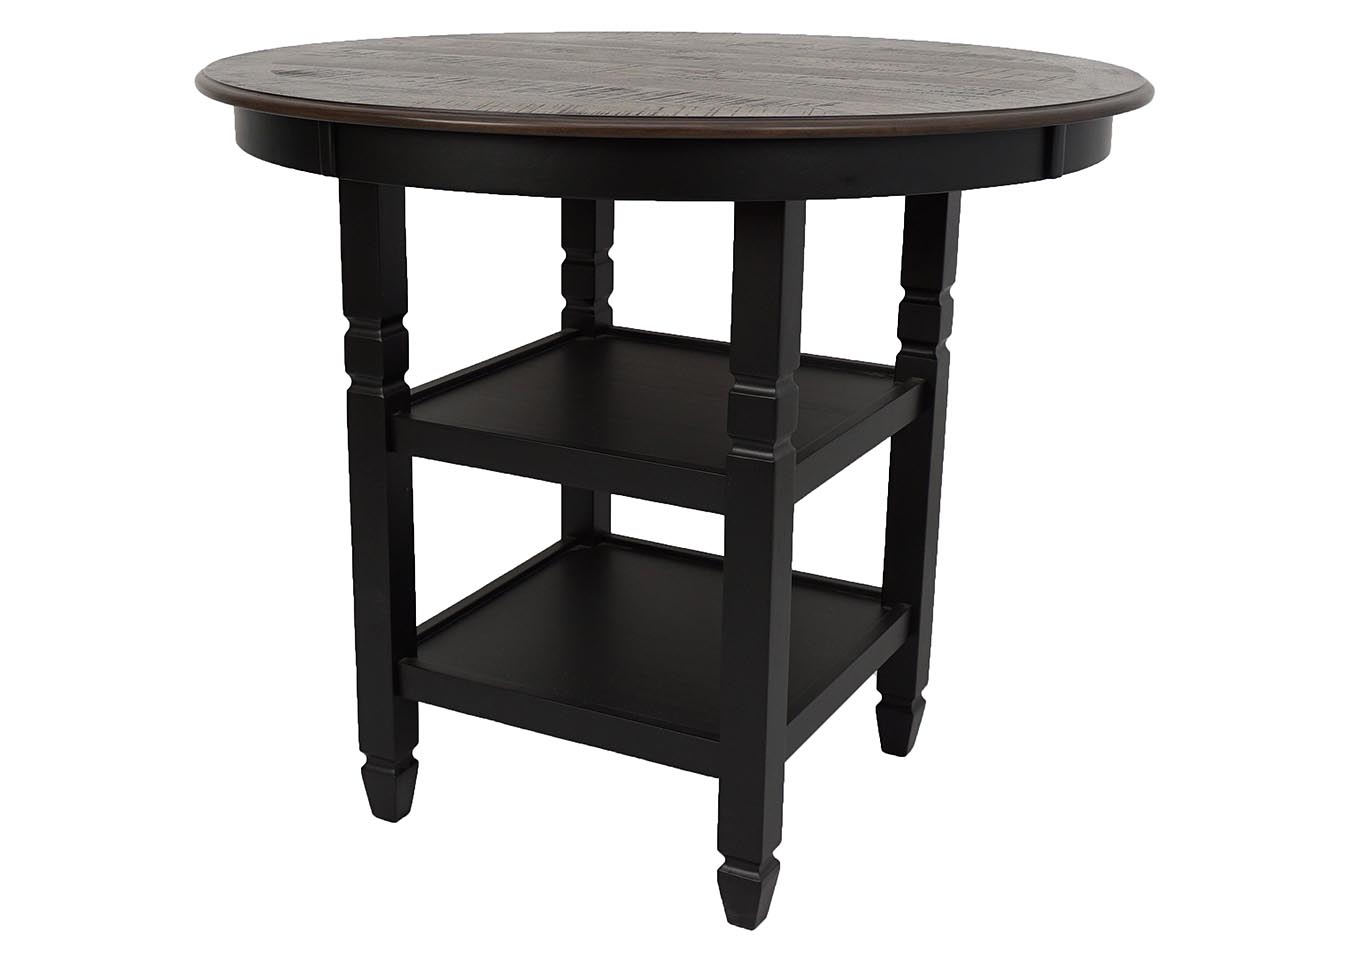 Prairie Point Black 47" Round Dining Table,New Classic